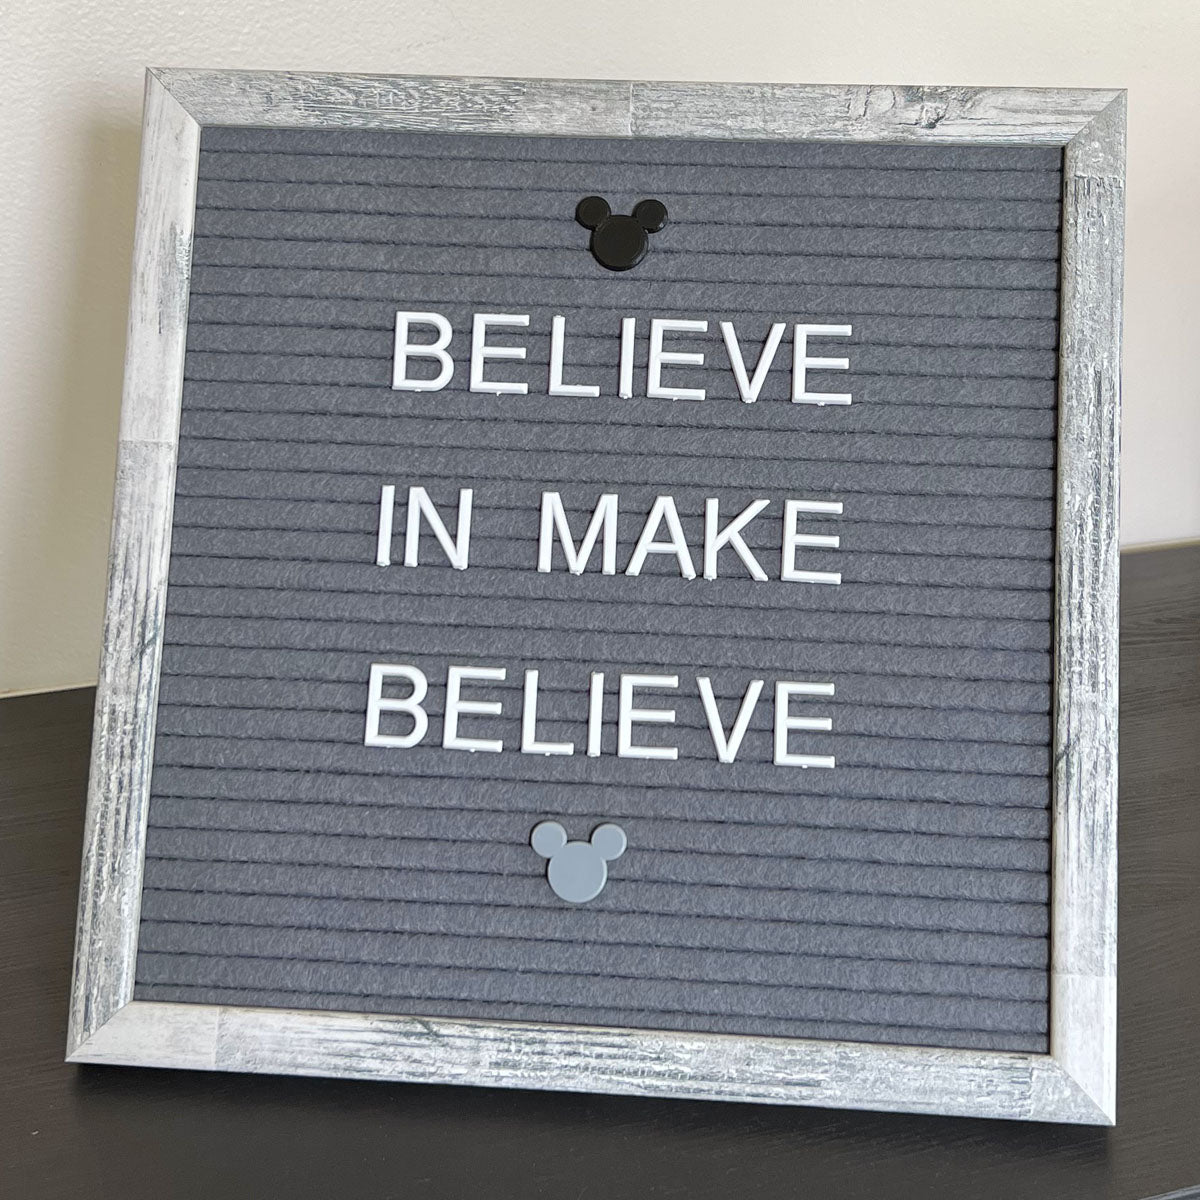 12"x12" Gray Felt Letter Board with Wood Frame - CLEARANCE